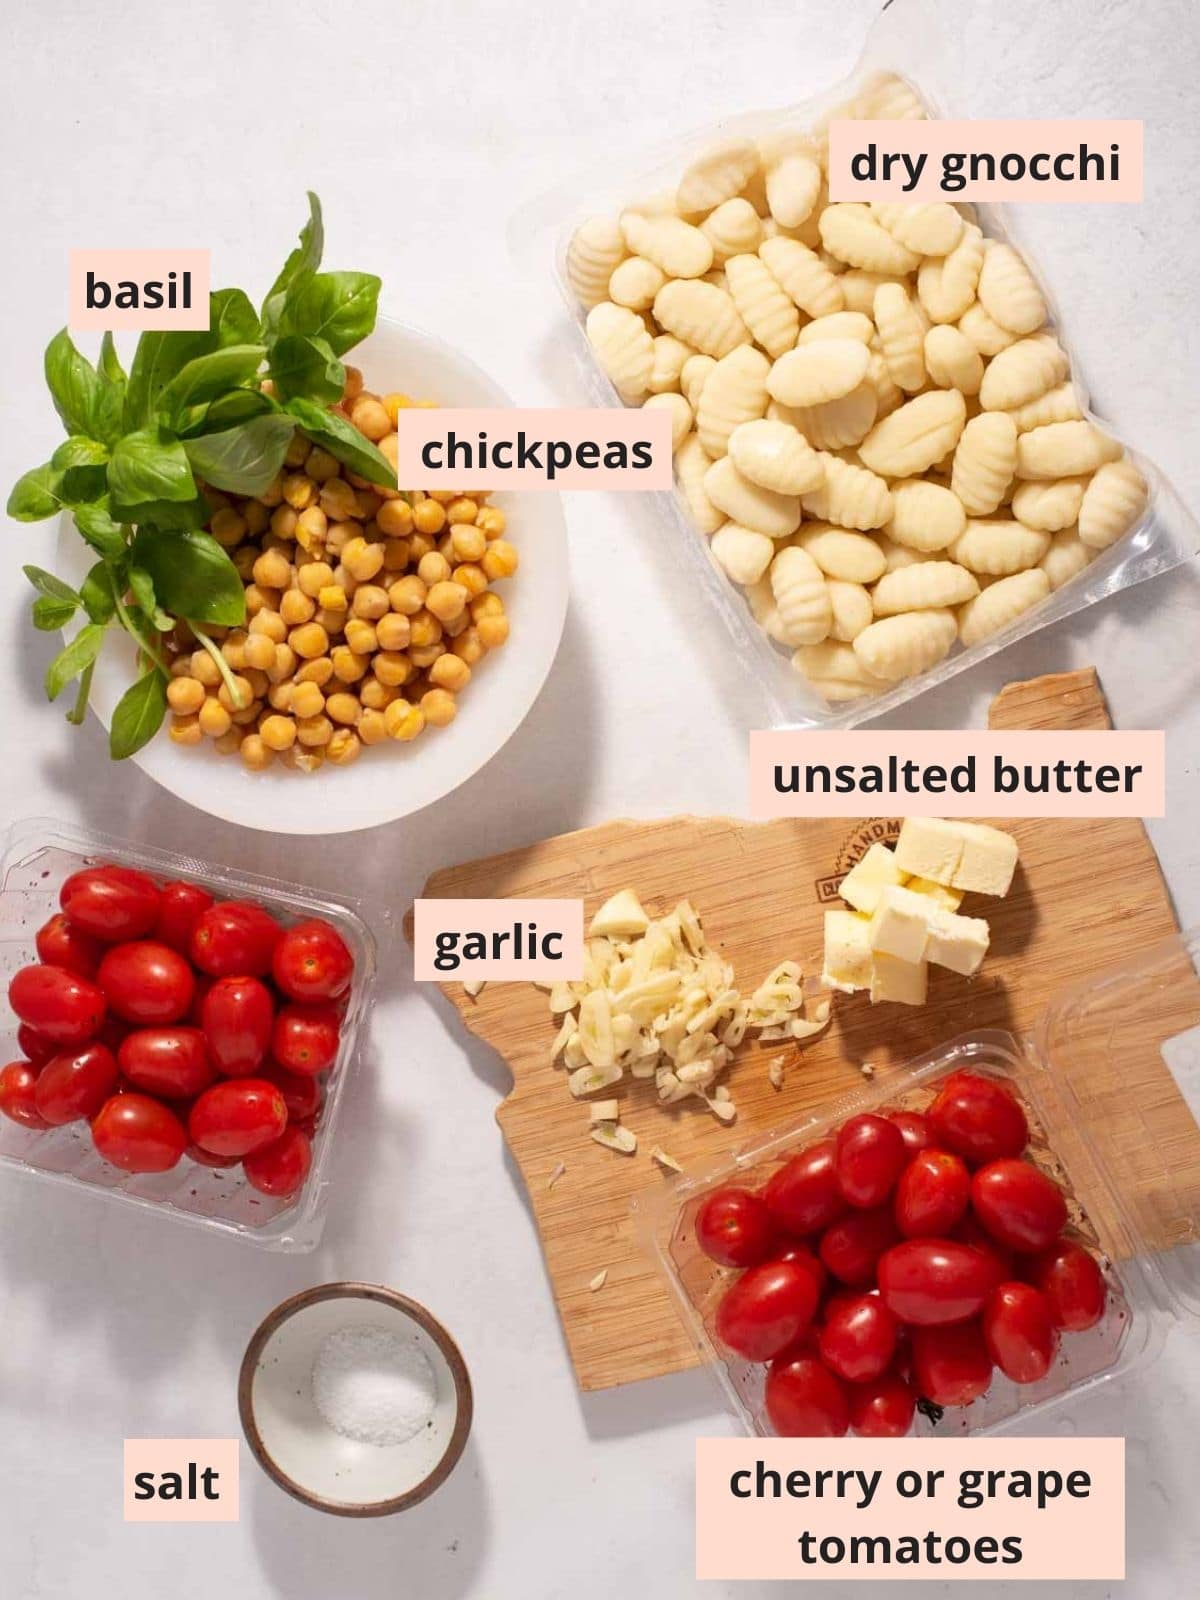 Labeled ingredients used to make tomato gnocchi.